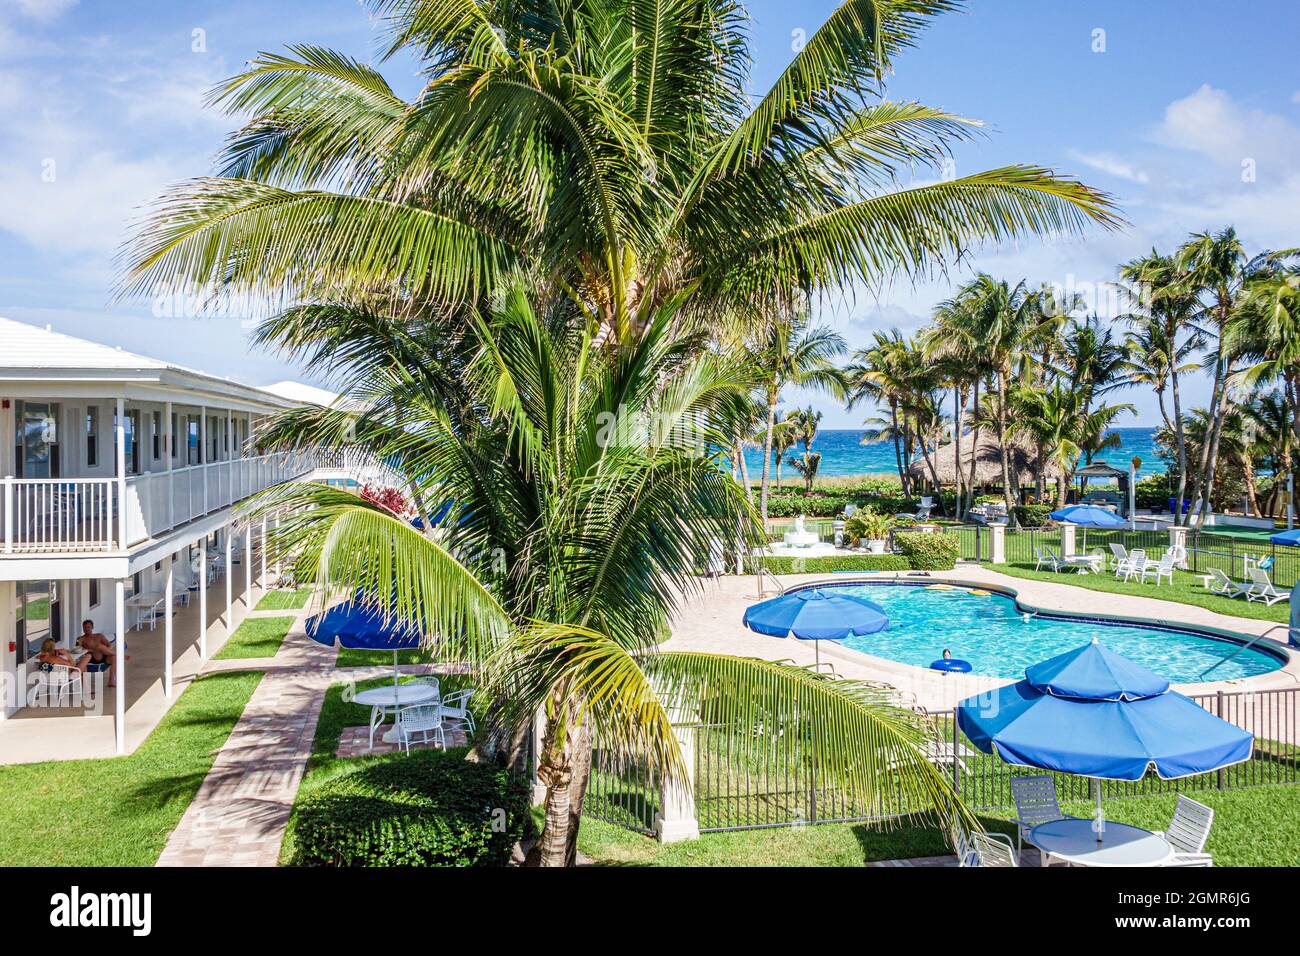 Delray Beach Florida,Wright by the Sea,hotel motel resort swimming pool area palm trees property Stock Photo